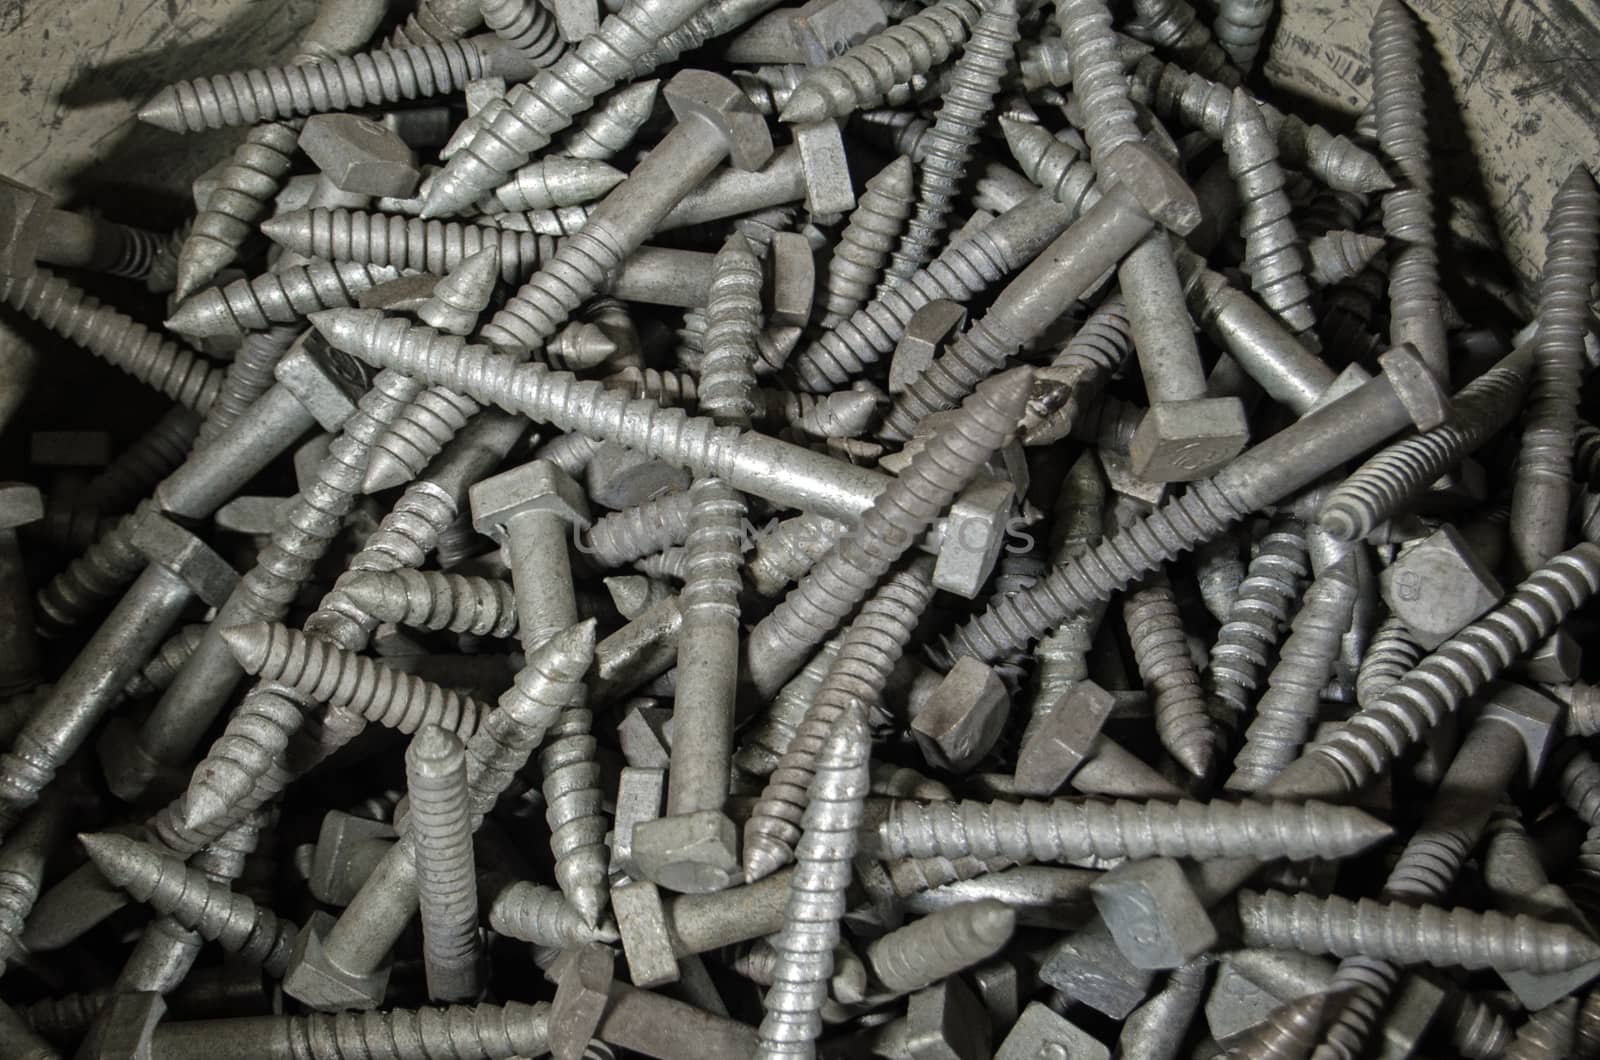 View of a bucket of large metal screws used in civil engineering projects.